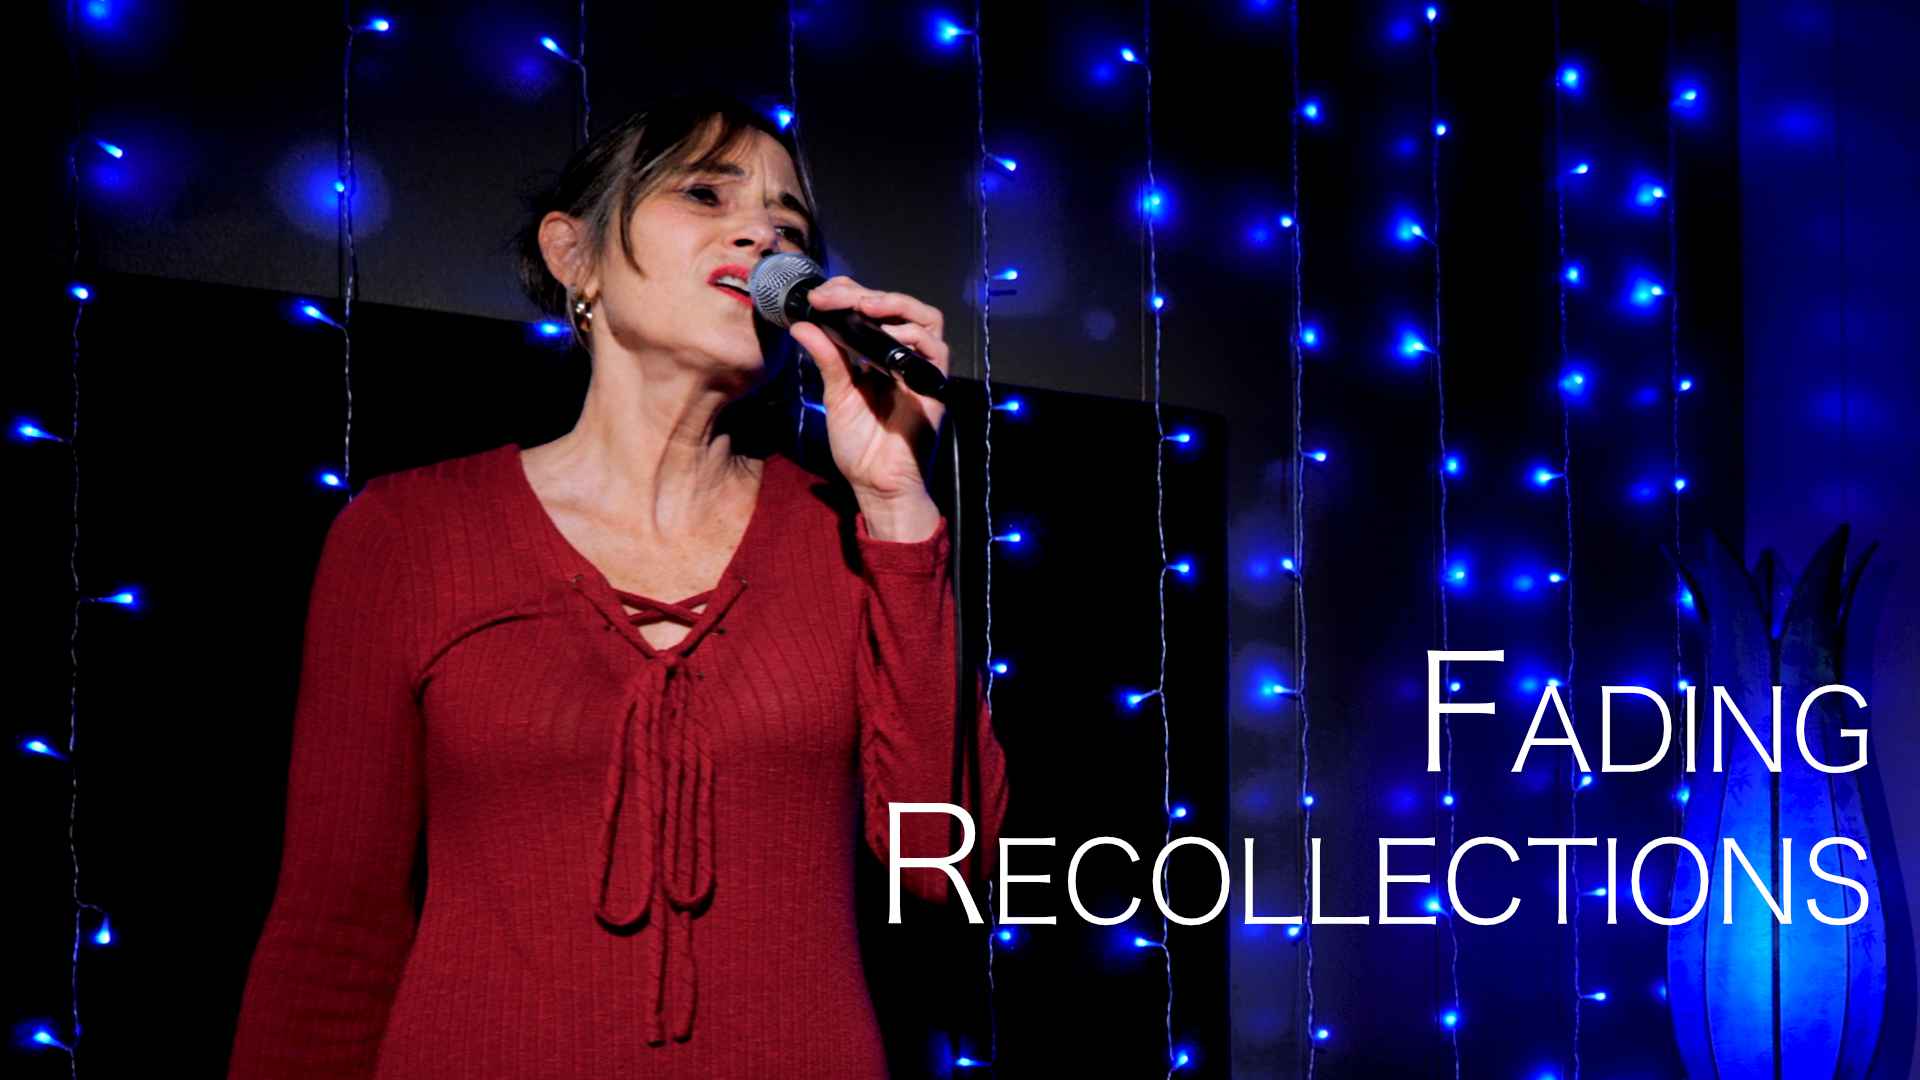 Video - 'Fading Recollections